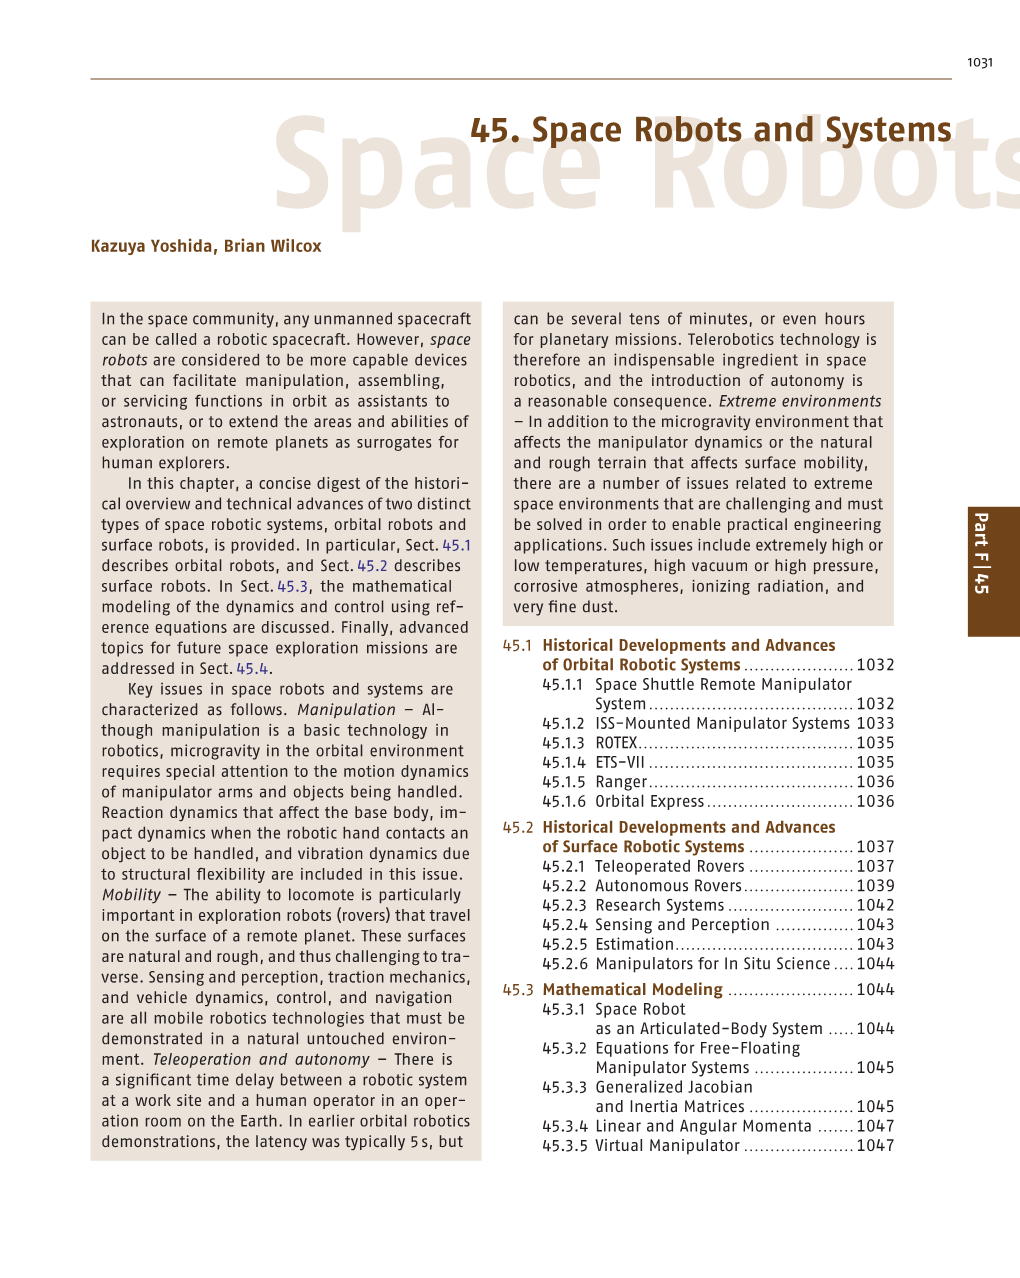 45. Space Robots and Systems